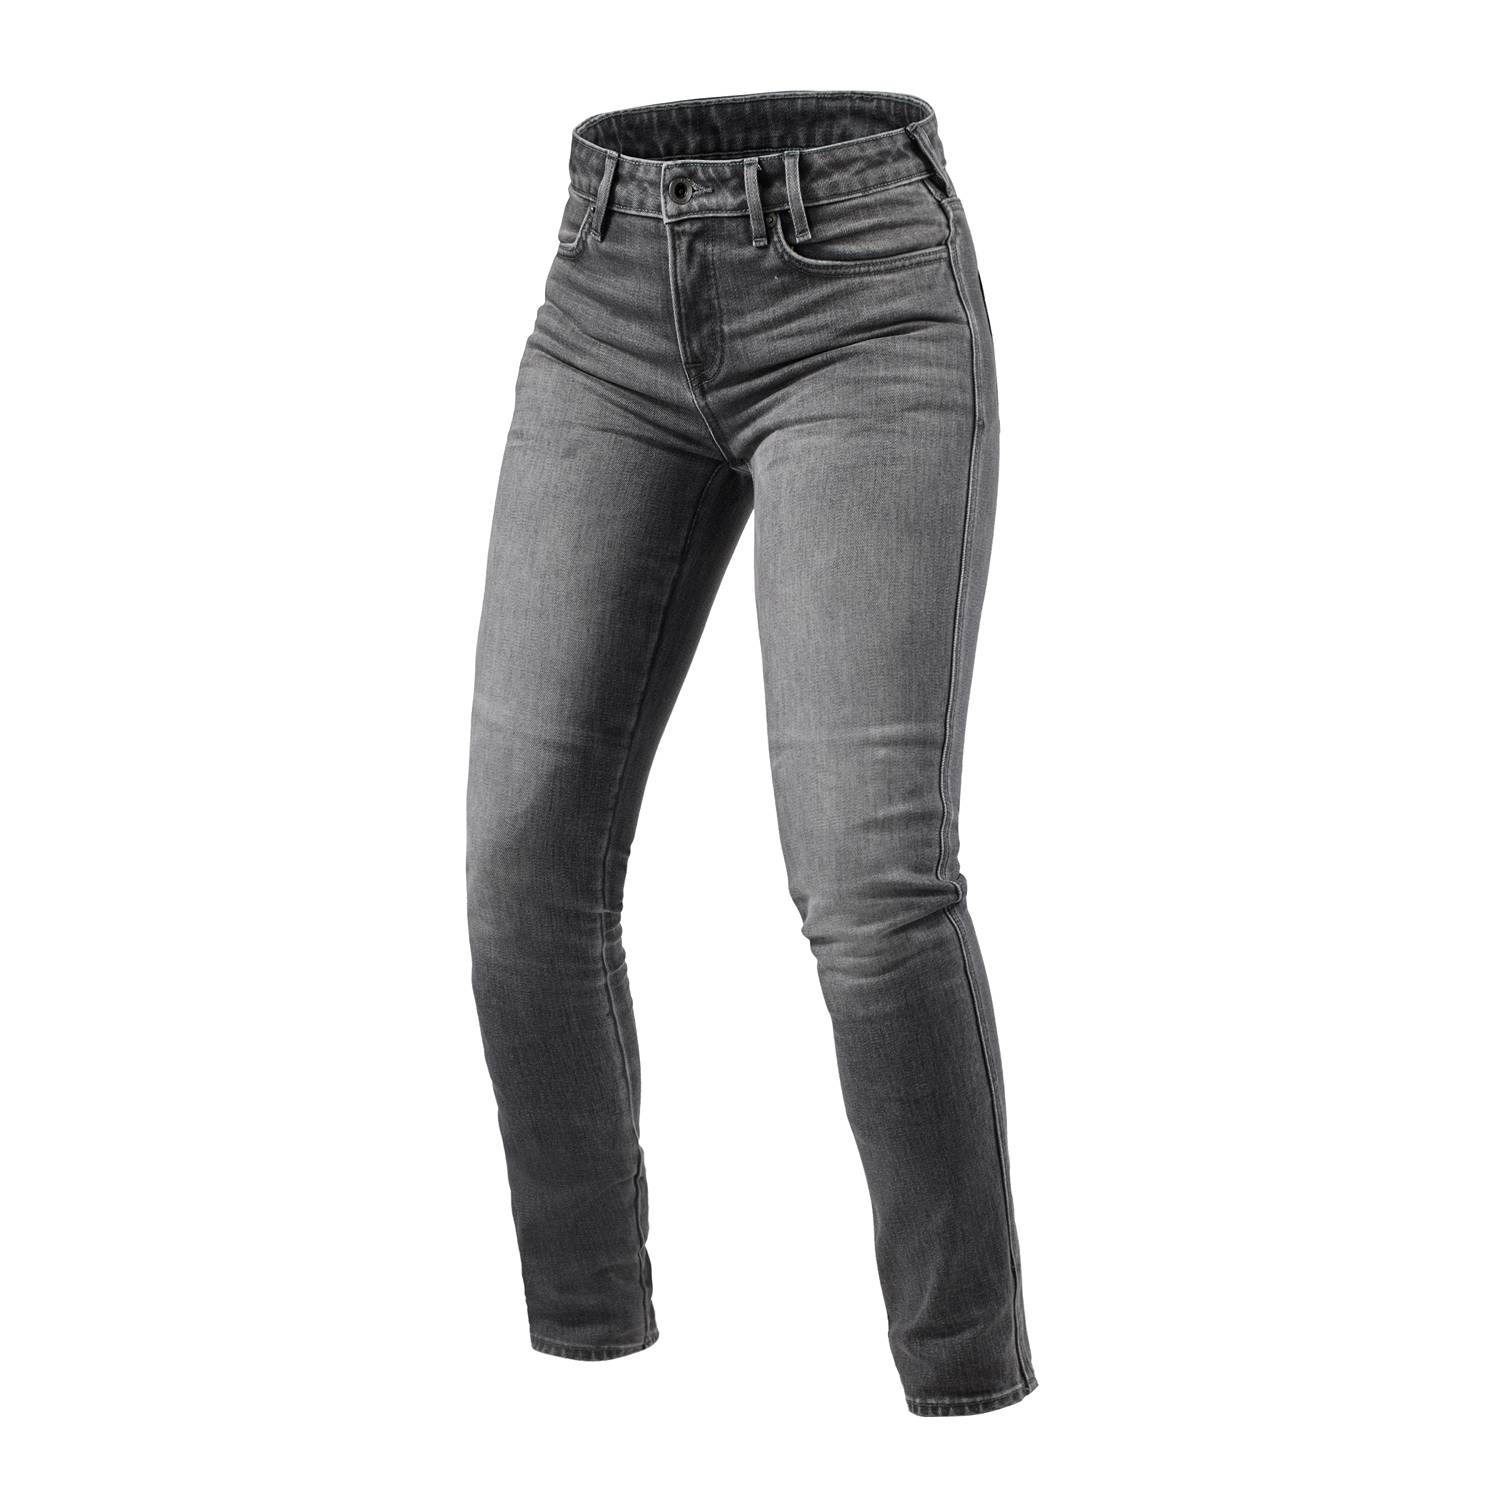 Image of EU REV'IT! Jeans Shelby 2 Ladies SK Medium Grey Stone L30 Taille L30/W32